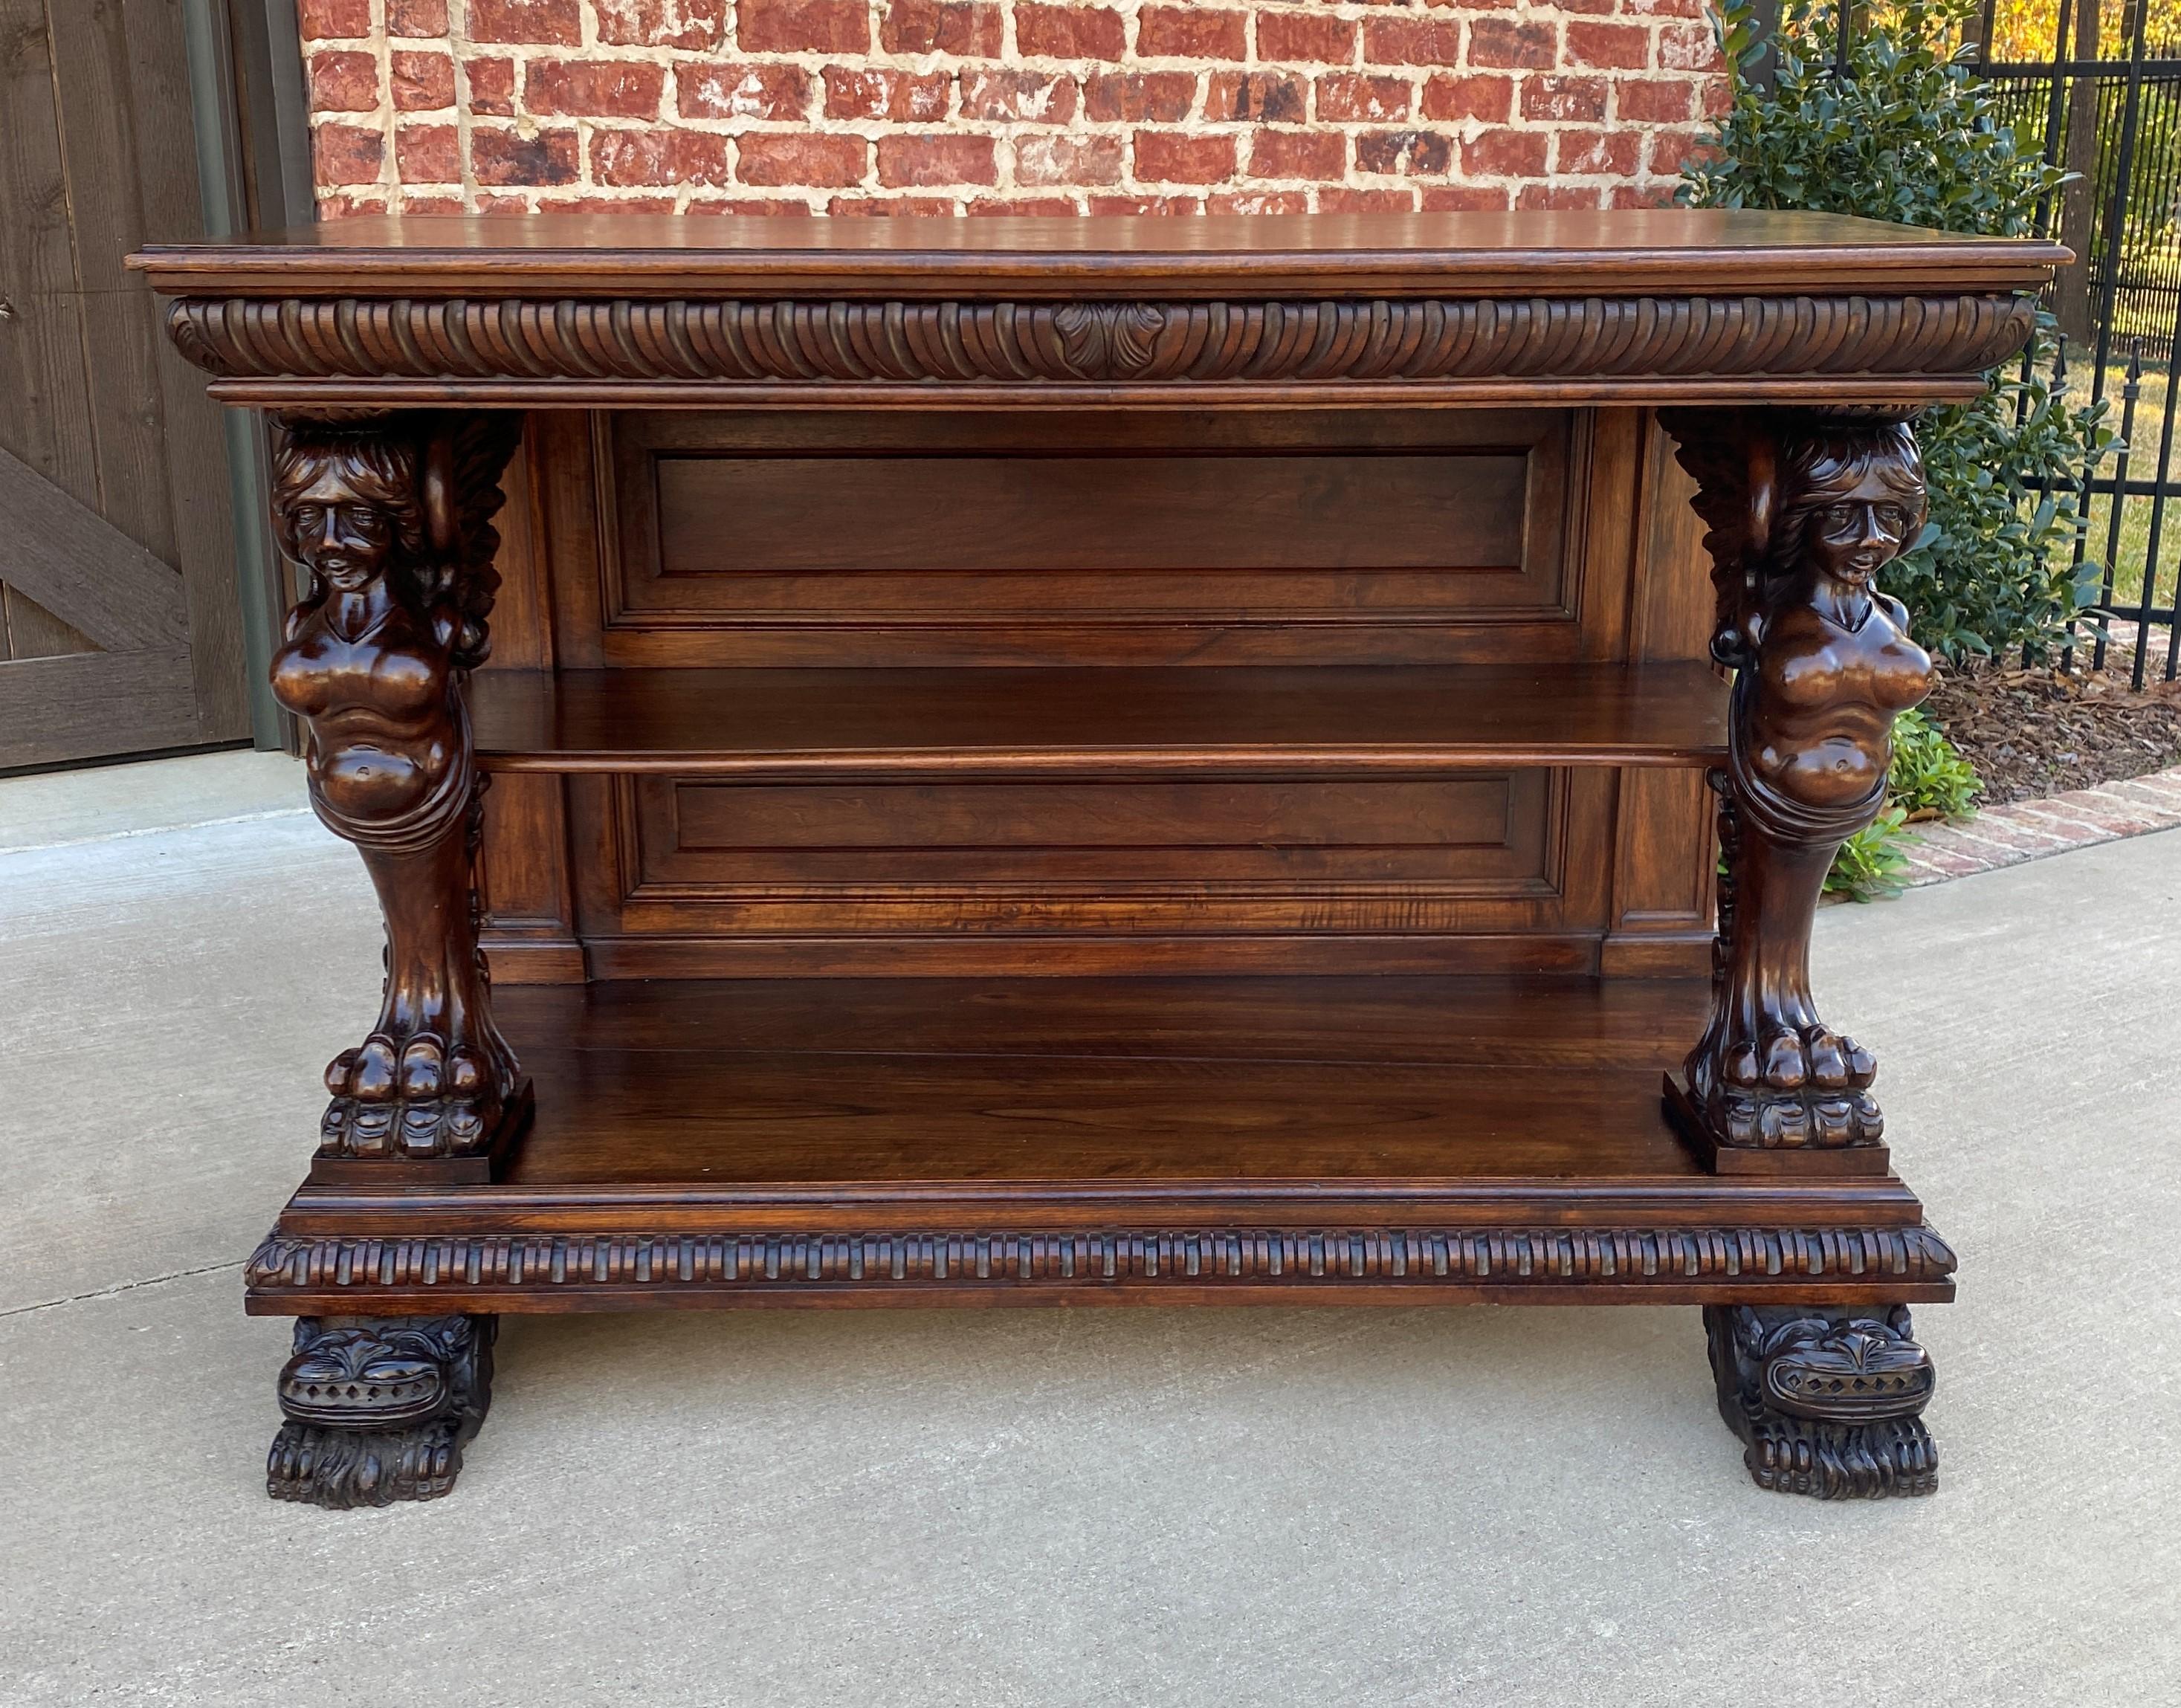 Exquisite antique French Gothic highly carved walnut console, sofa table or sideboard/server~~c. 1880s

Highly carved antique French Gothic walnut console, sofa table, sideboard or server with winged figural supports ,